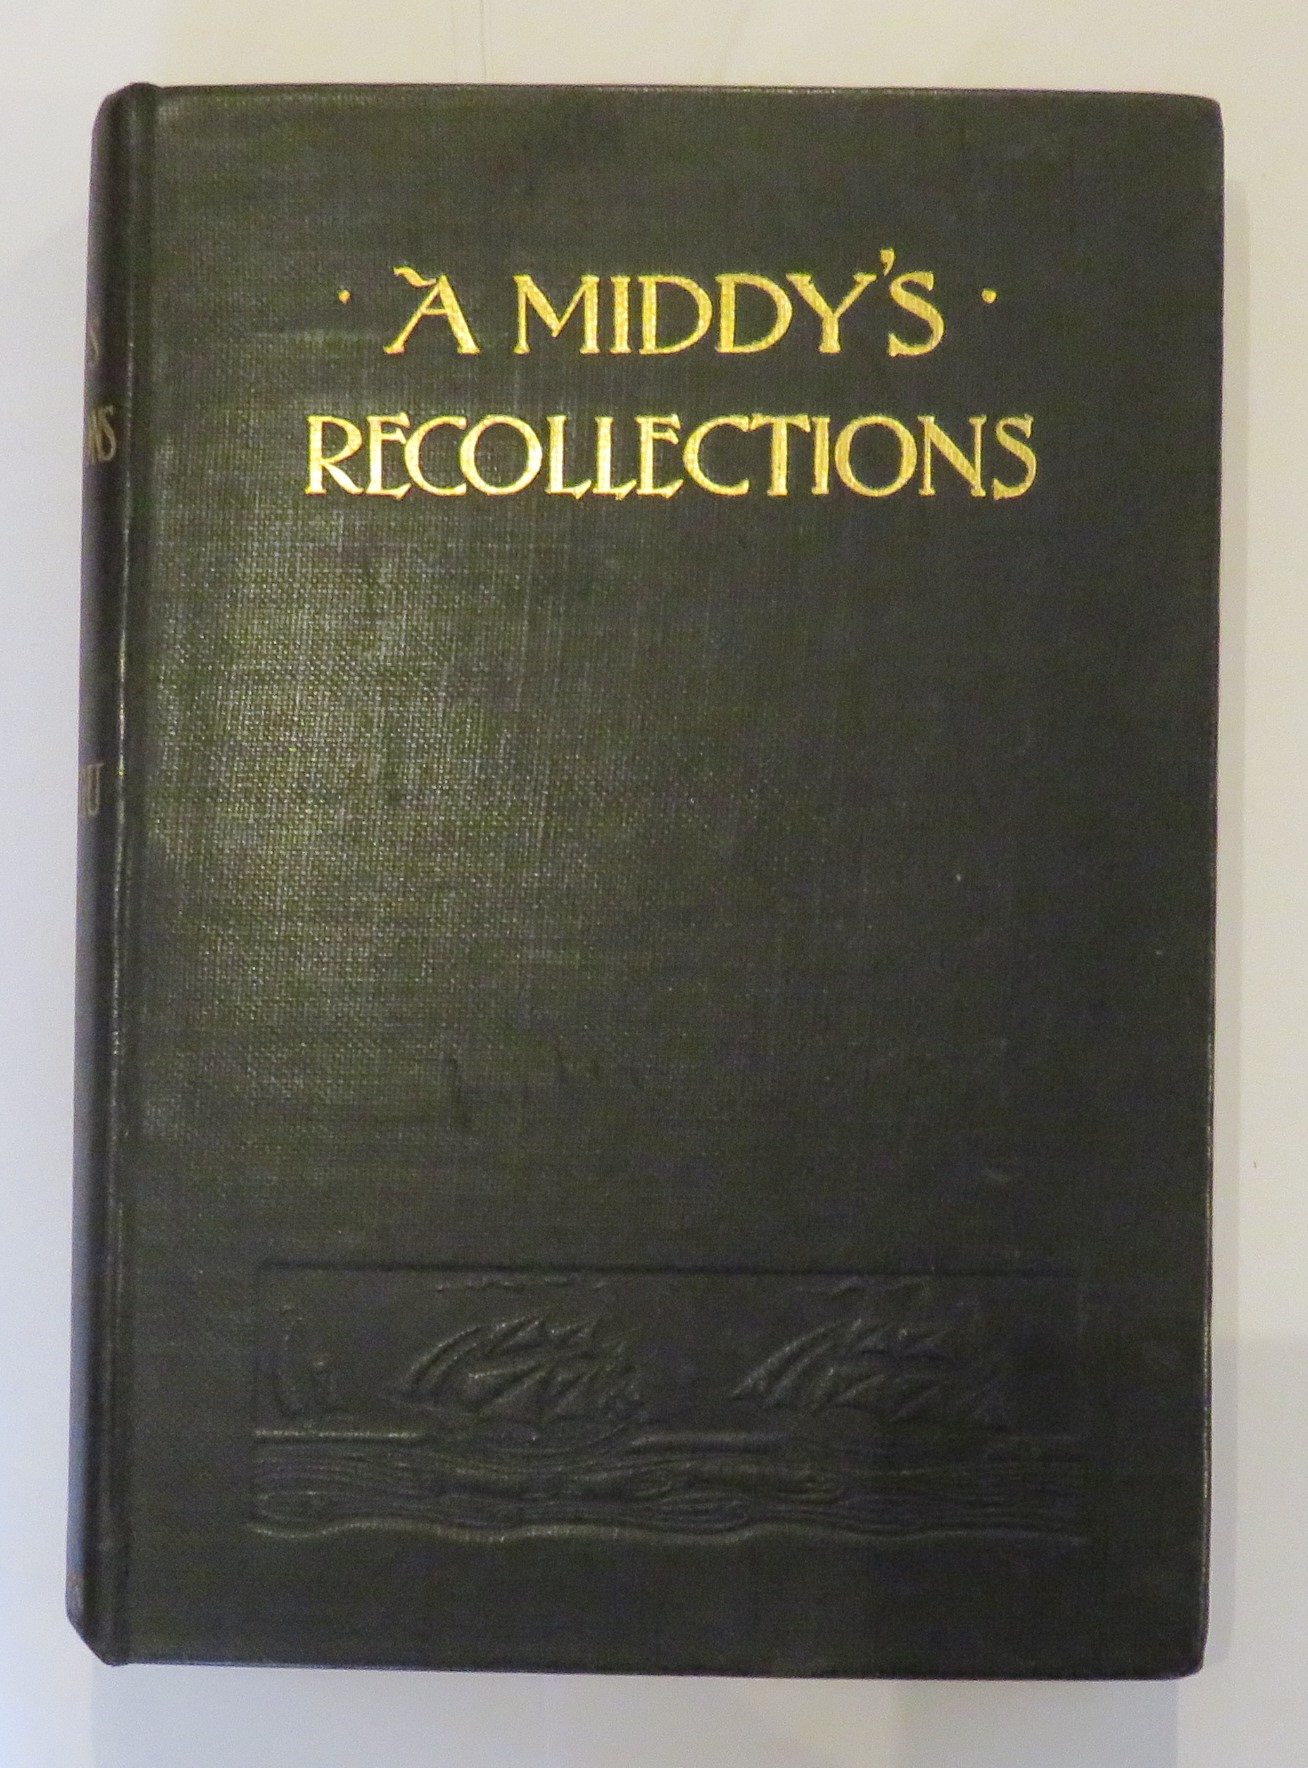 A Middy's Recollections